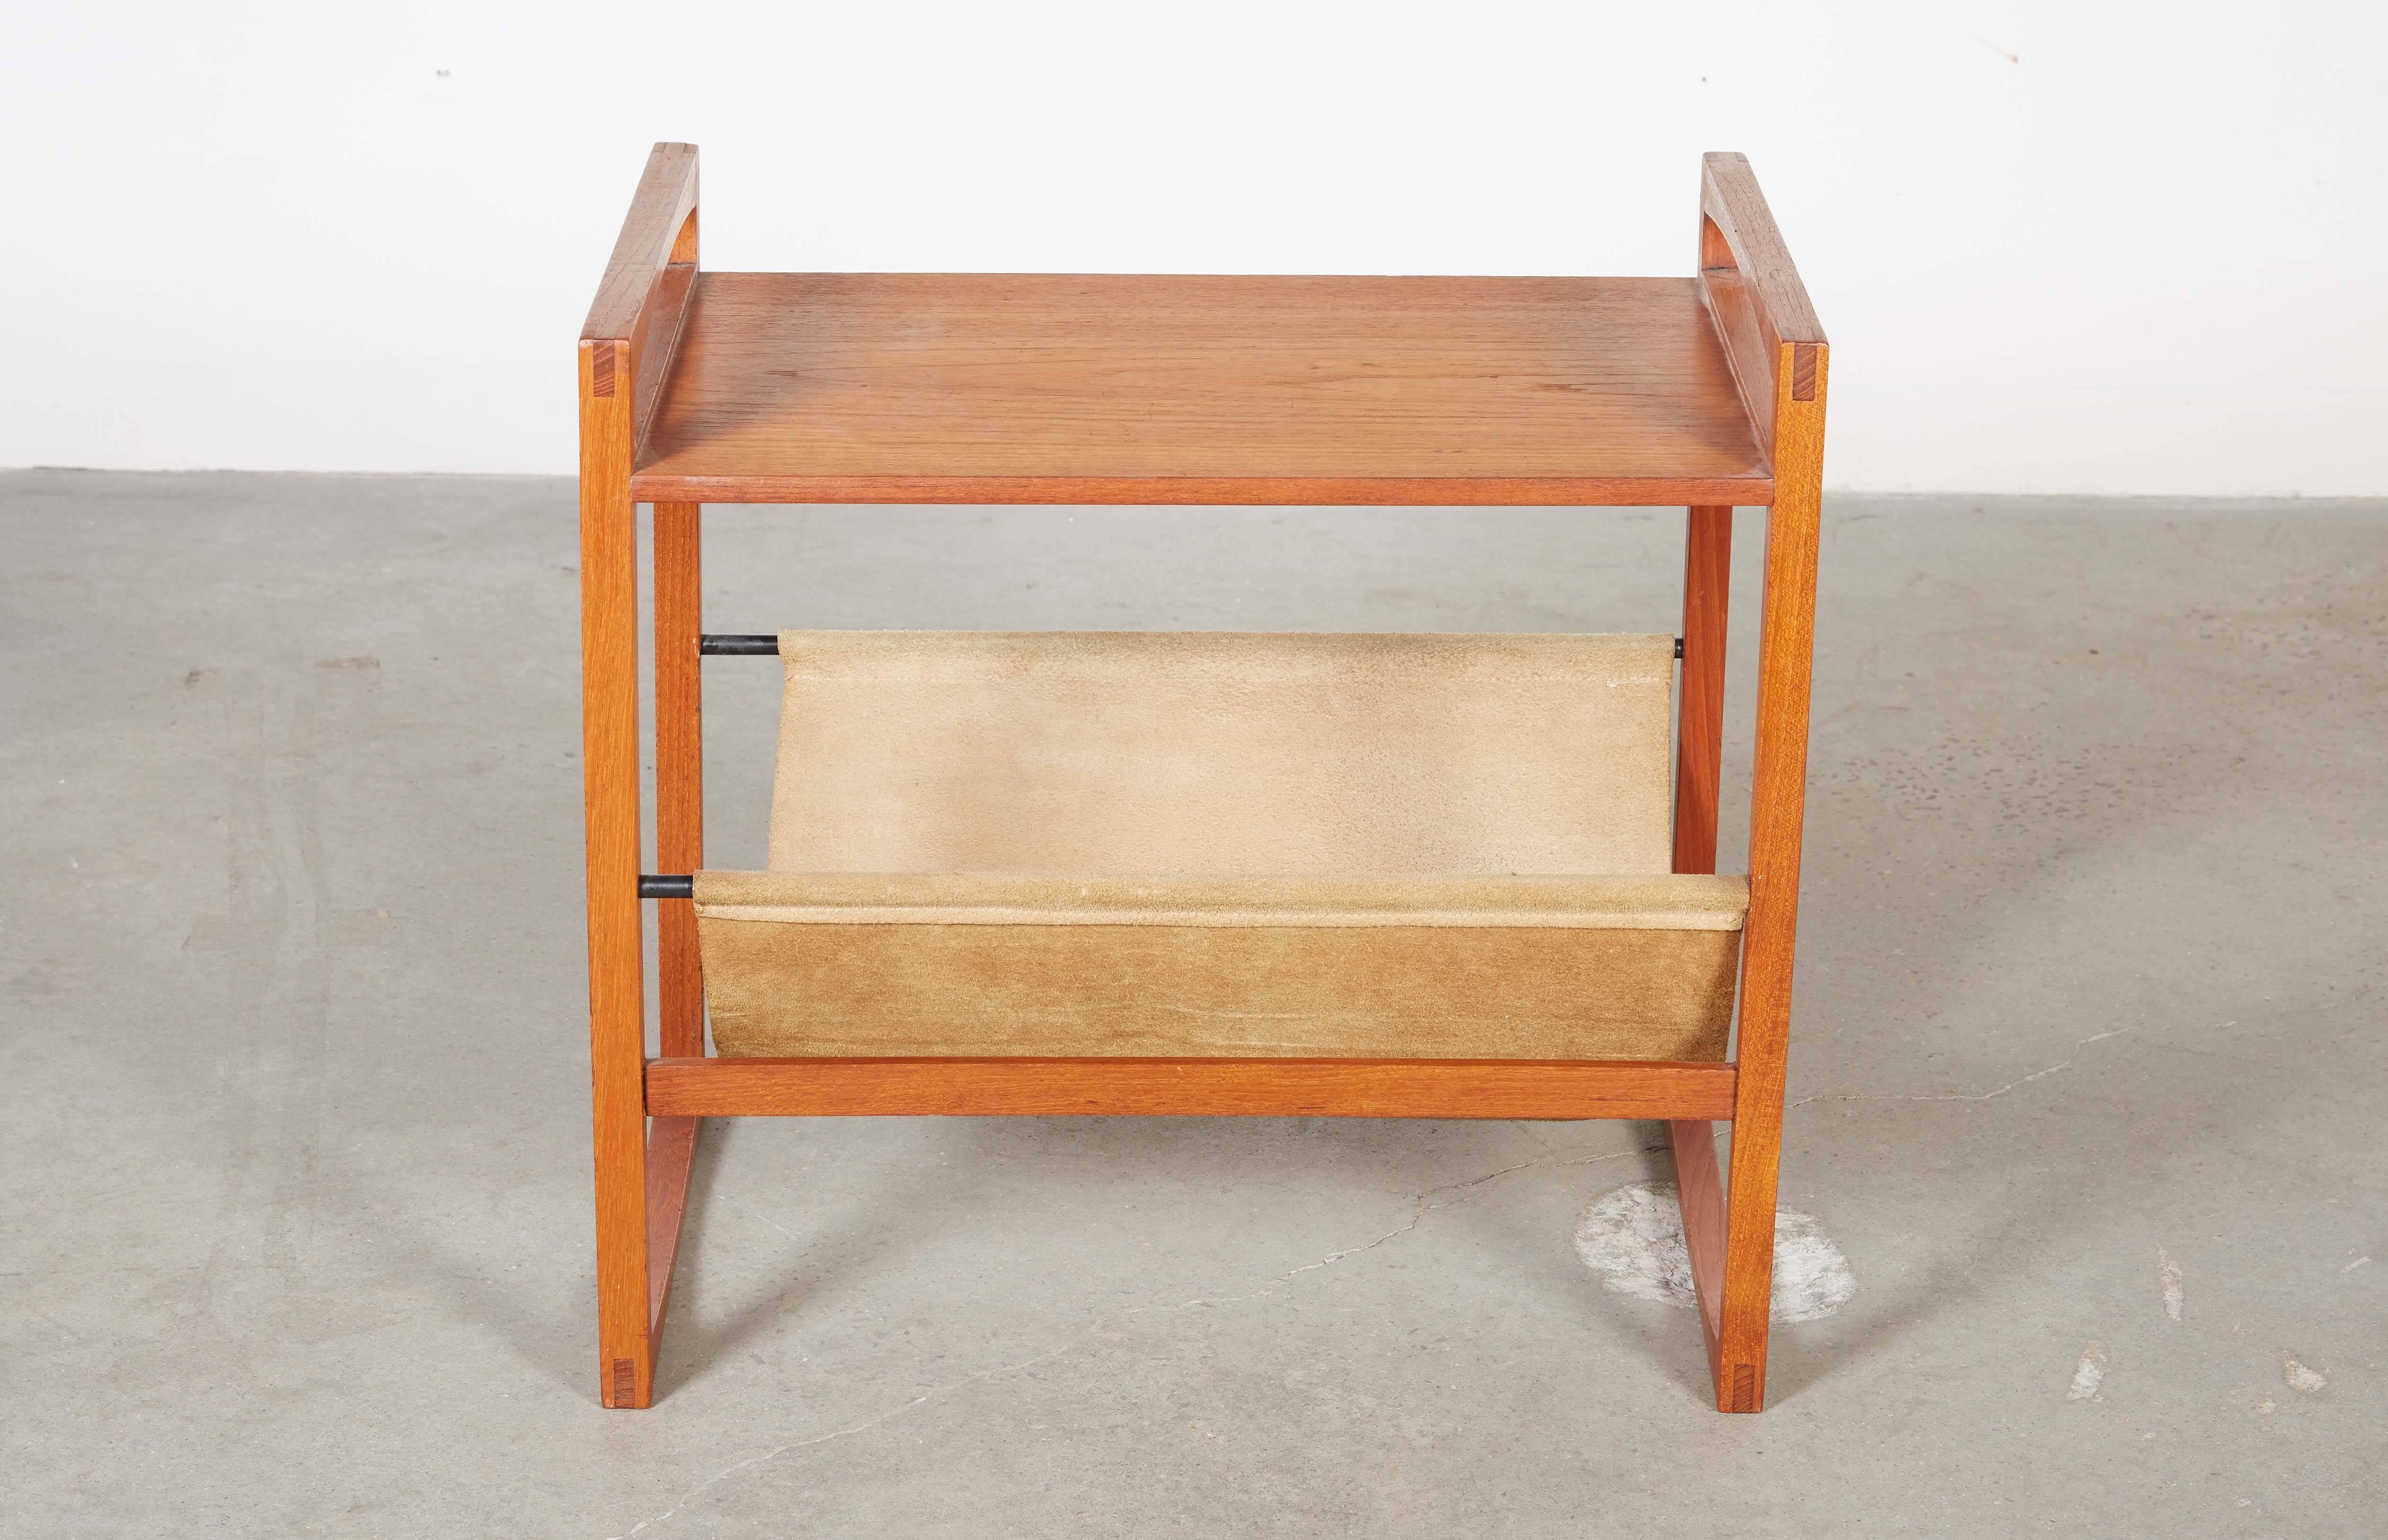 Vintage 1950s Teak Side Table with Suede Sling Basket for Magazines

This mid century side table is in excellent condition. Perfect for tiny spaces. Ready for pick up, delivery, or shipping anywhere in the world.